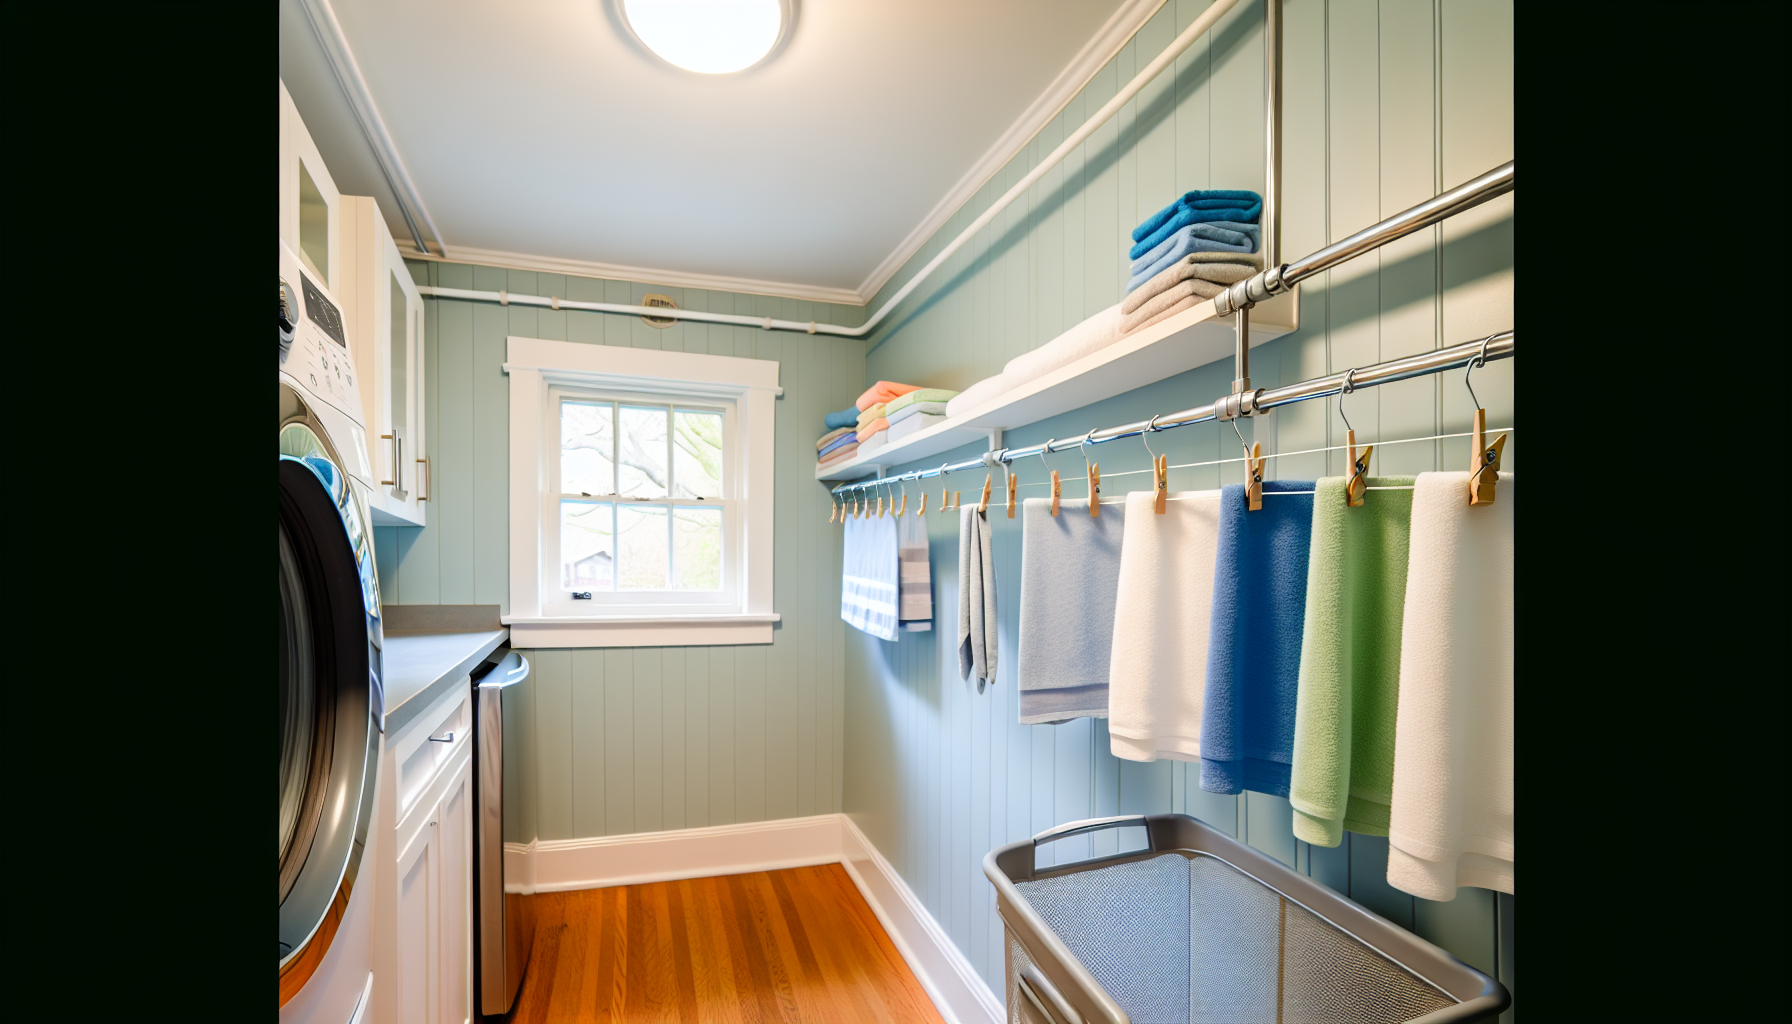 Retractable clothesline and wall-mounted rods in a laundry room